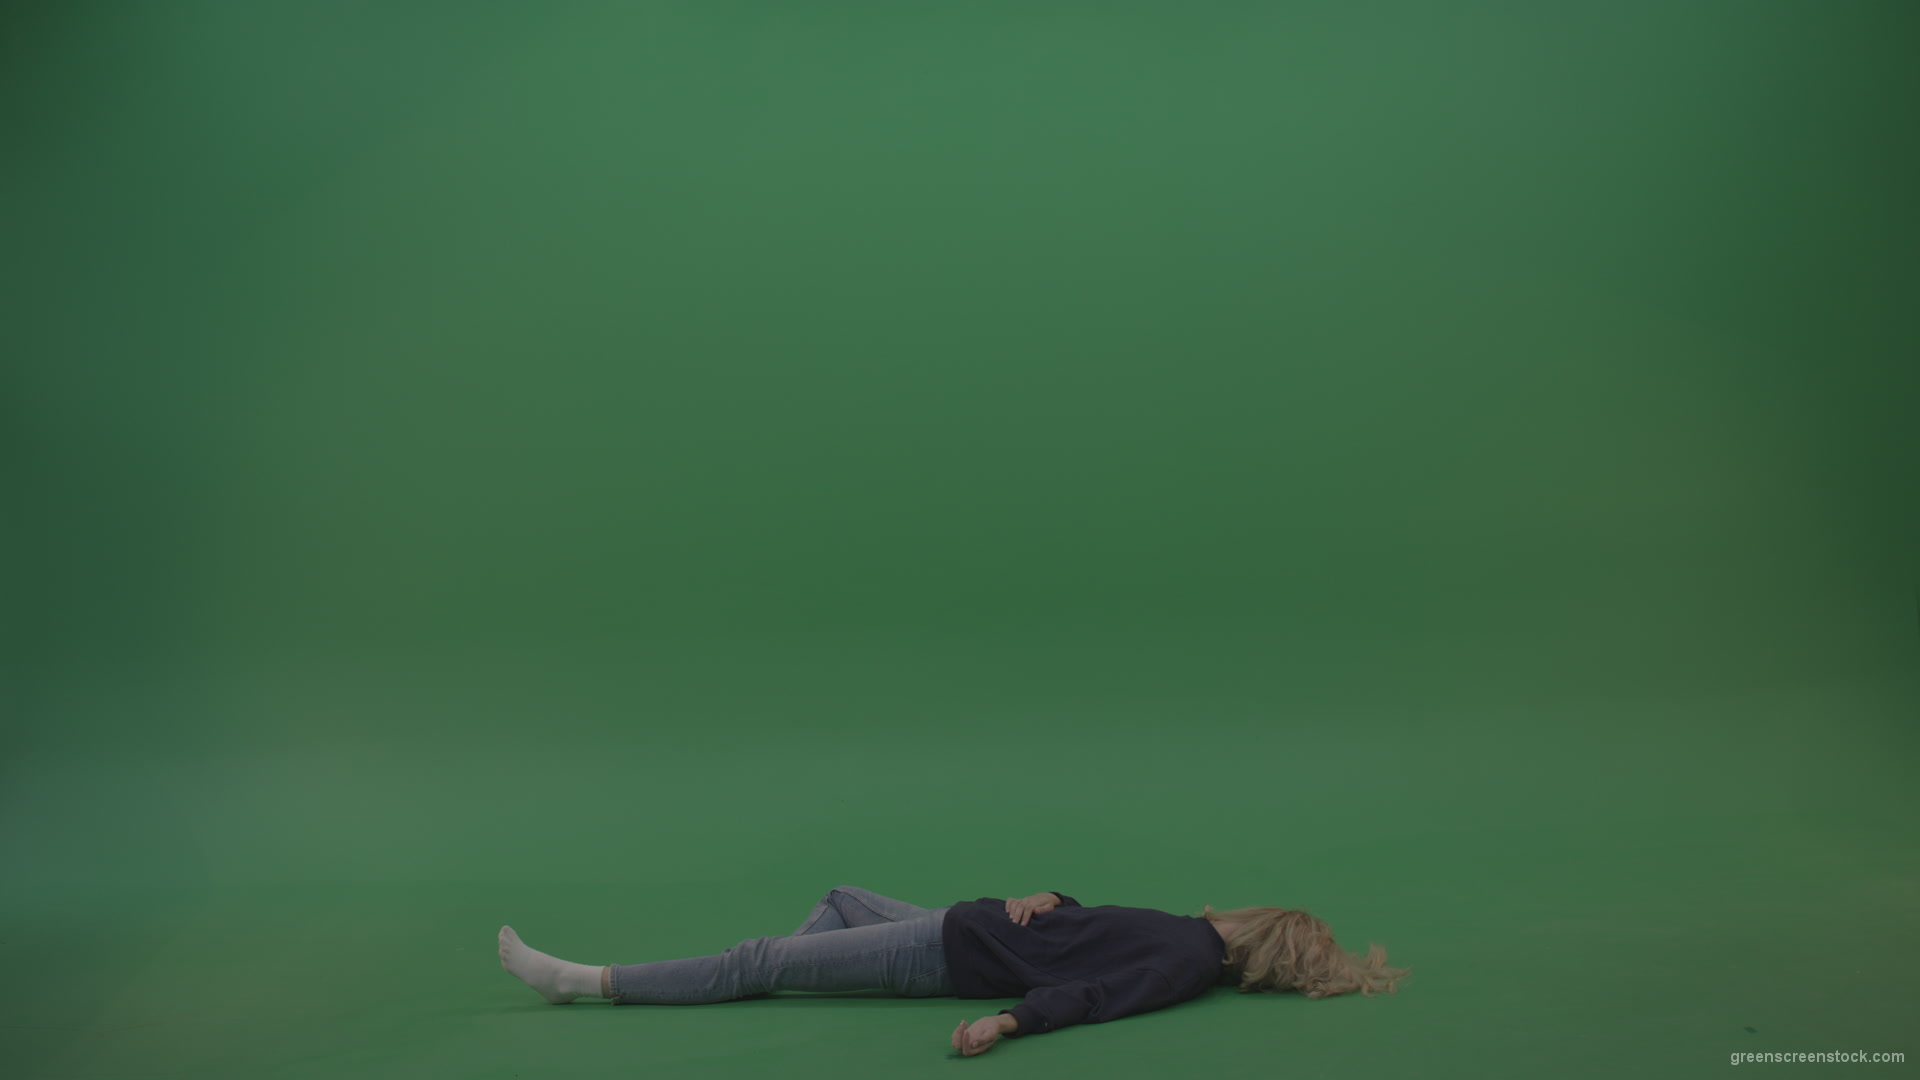 Brave_Fireman_Runs_To_Unconscious_Young_Victim_Girl_Slightly_Wakes_Her_Up_Takes_On_Strong_Hands_And_Carries_Towards_Safety_On_Green_Screen_Wall_Background_002 Green Screen Stock